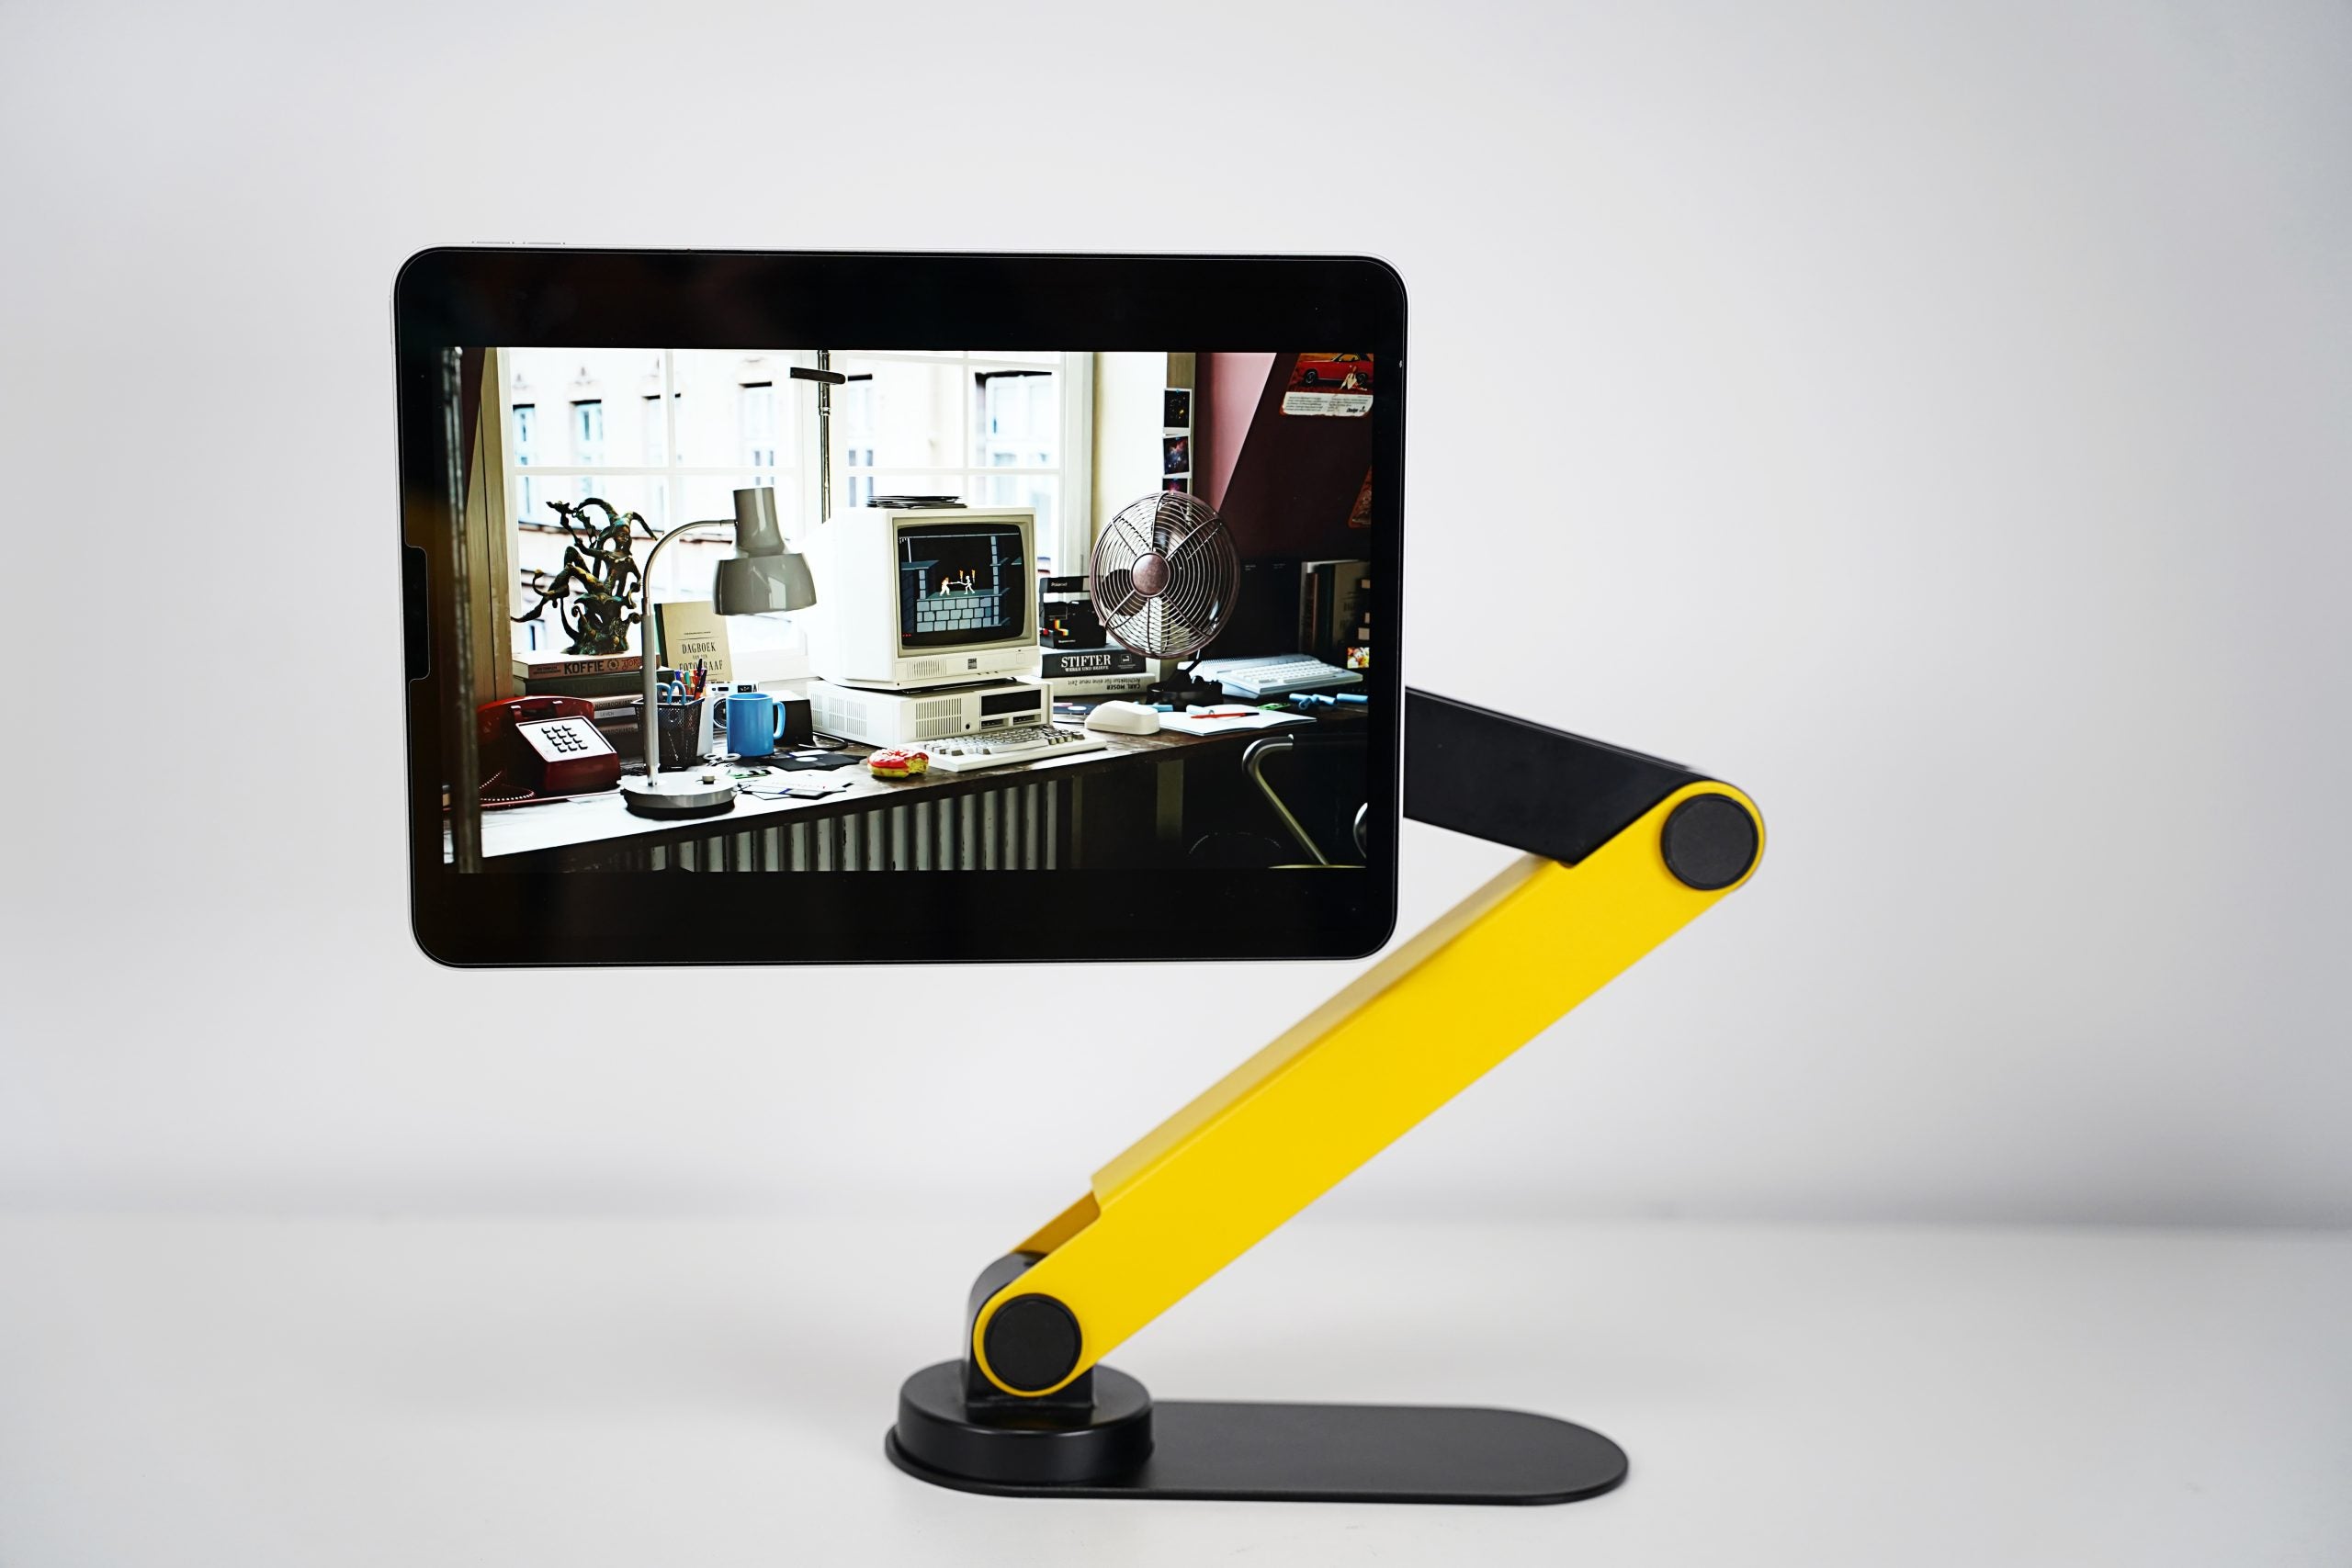 iSwift RoboArm Omni-Directional Mount for iPad or Phone